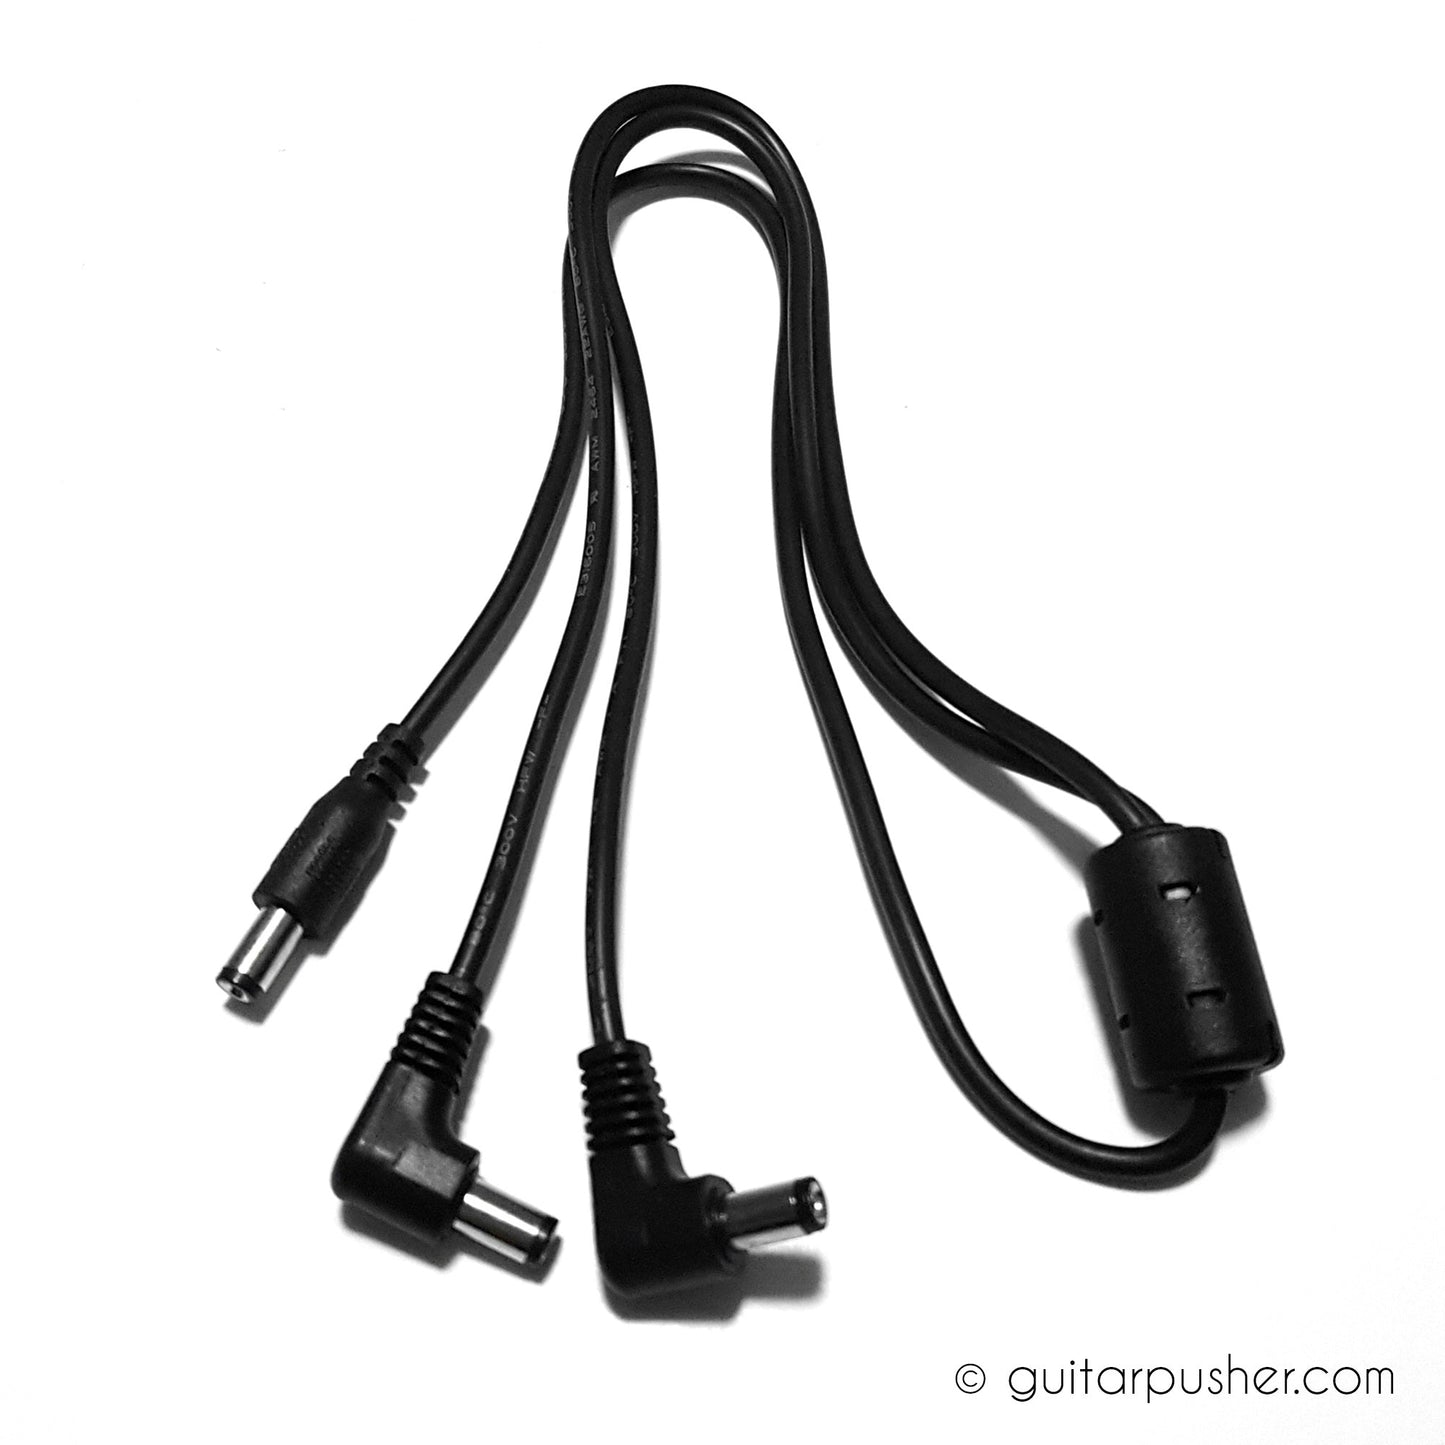 Vitoos CURRENT+ Current Booster Cable